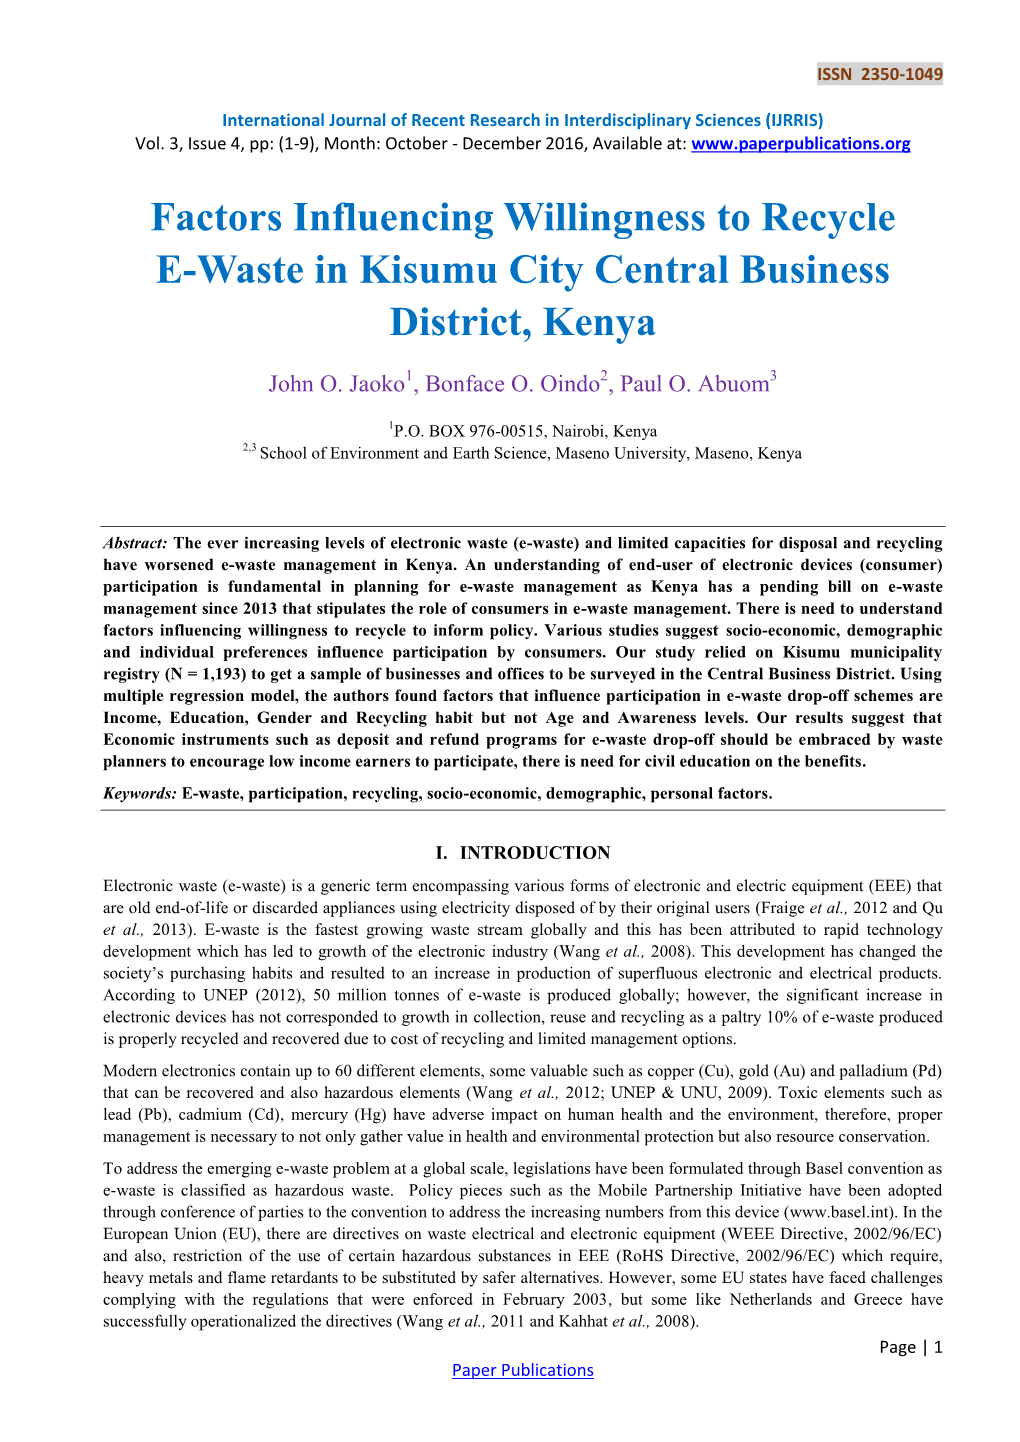 Factors Influencing Willingness to Recycle E-Waste in Kisumu City Central Business District, Kenya